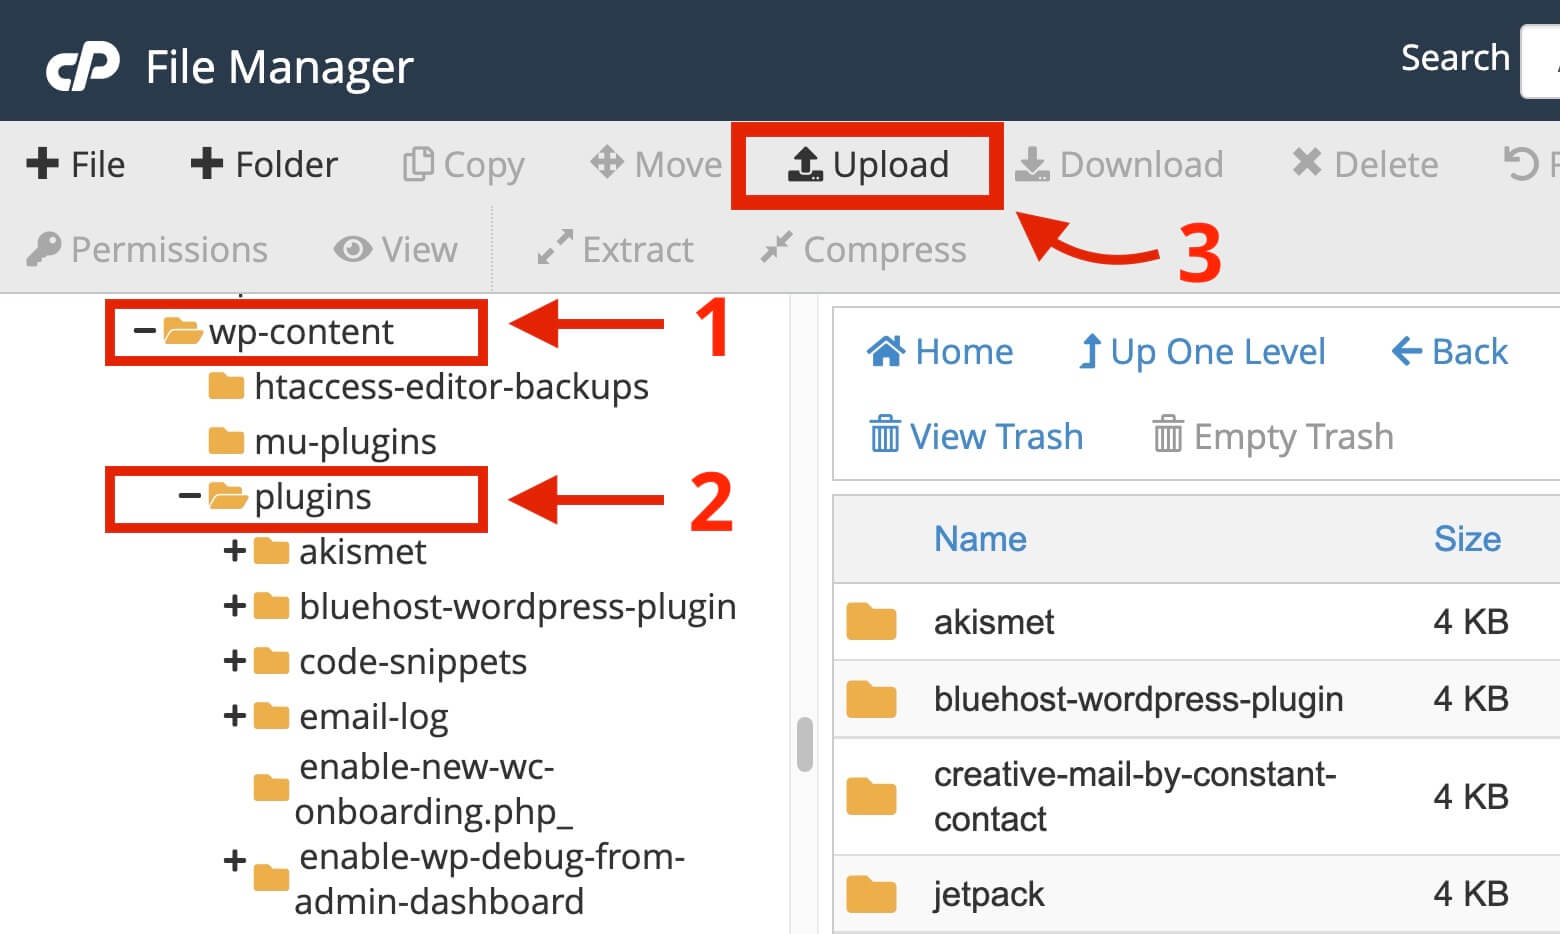 Upload plugin to the site from File Manager